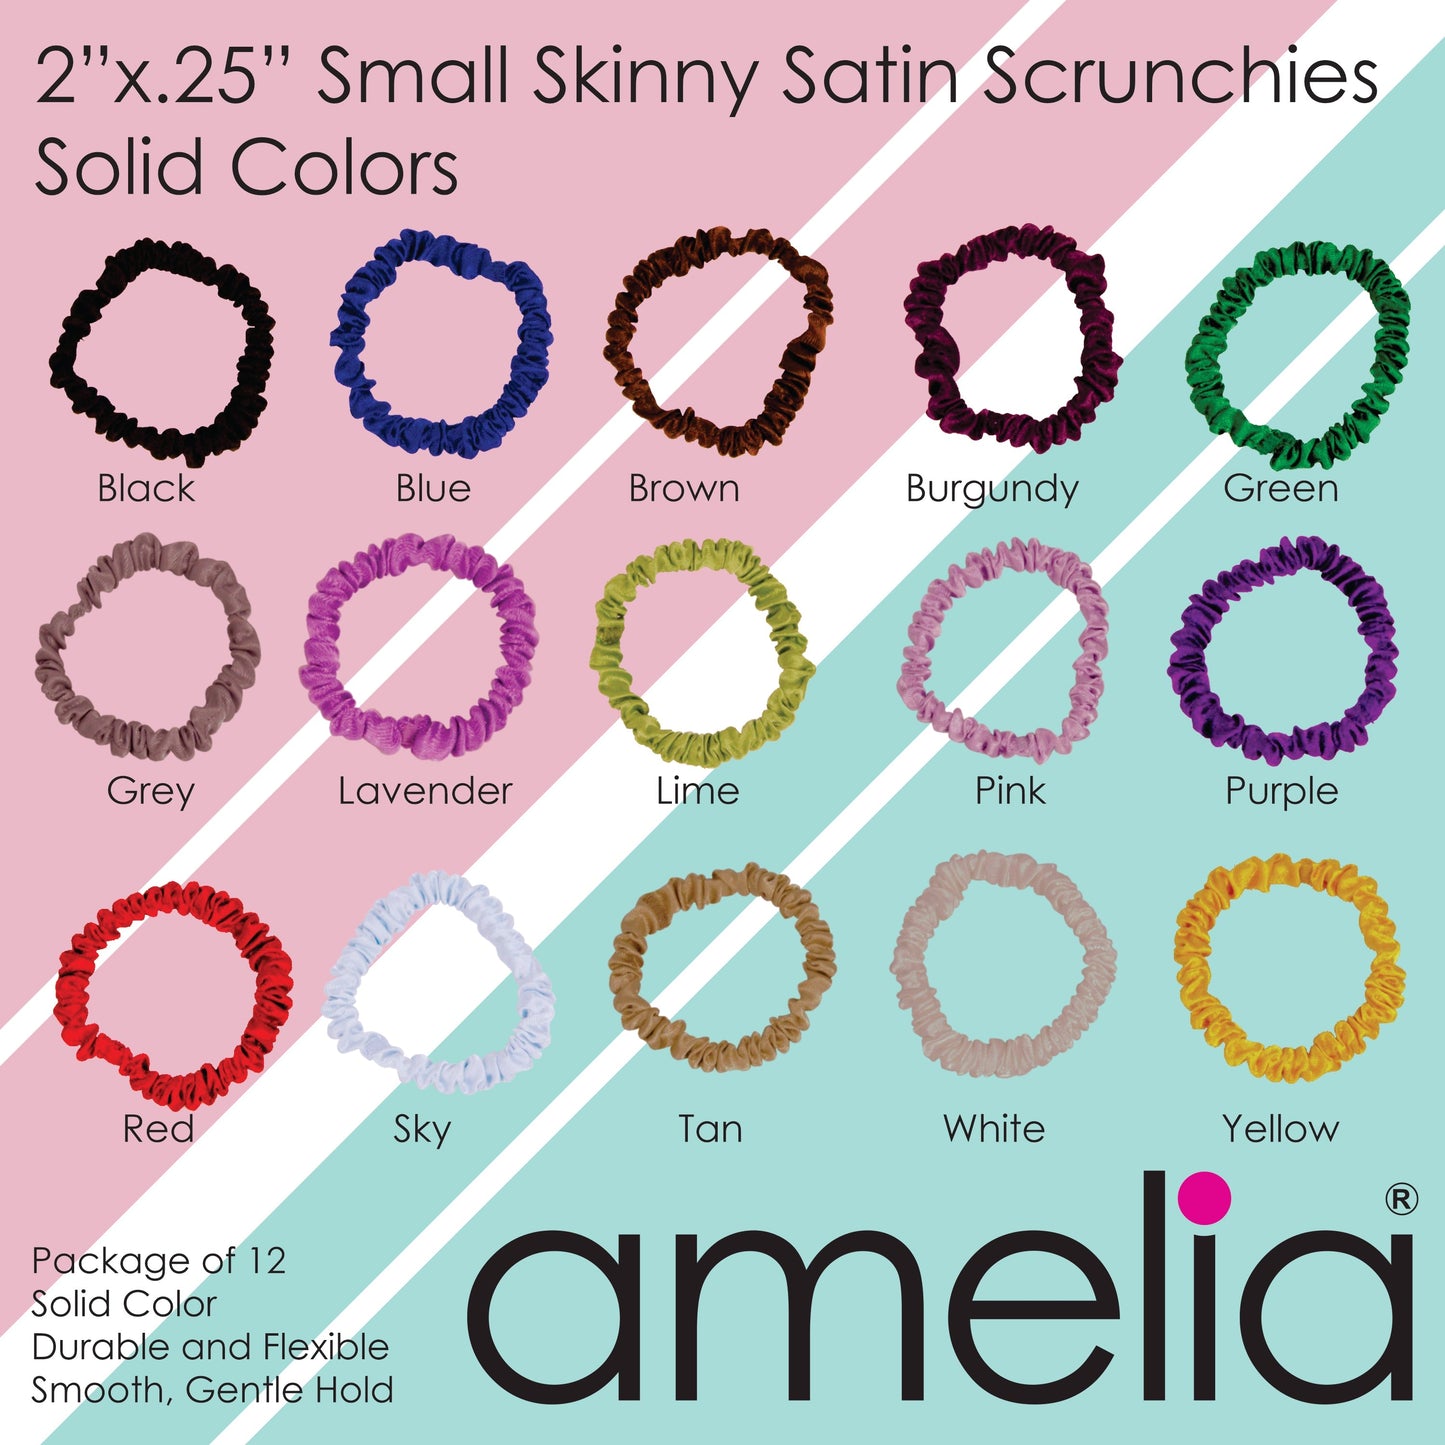 Amelia Beauty, Red, White and Blue Mix Skinny Satin Scrunchies, 2in Diameter, Gentle and Strong Hold, No Snag, No Dents or Creases. 12 Pack - 12 Retail Packs